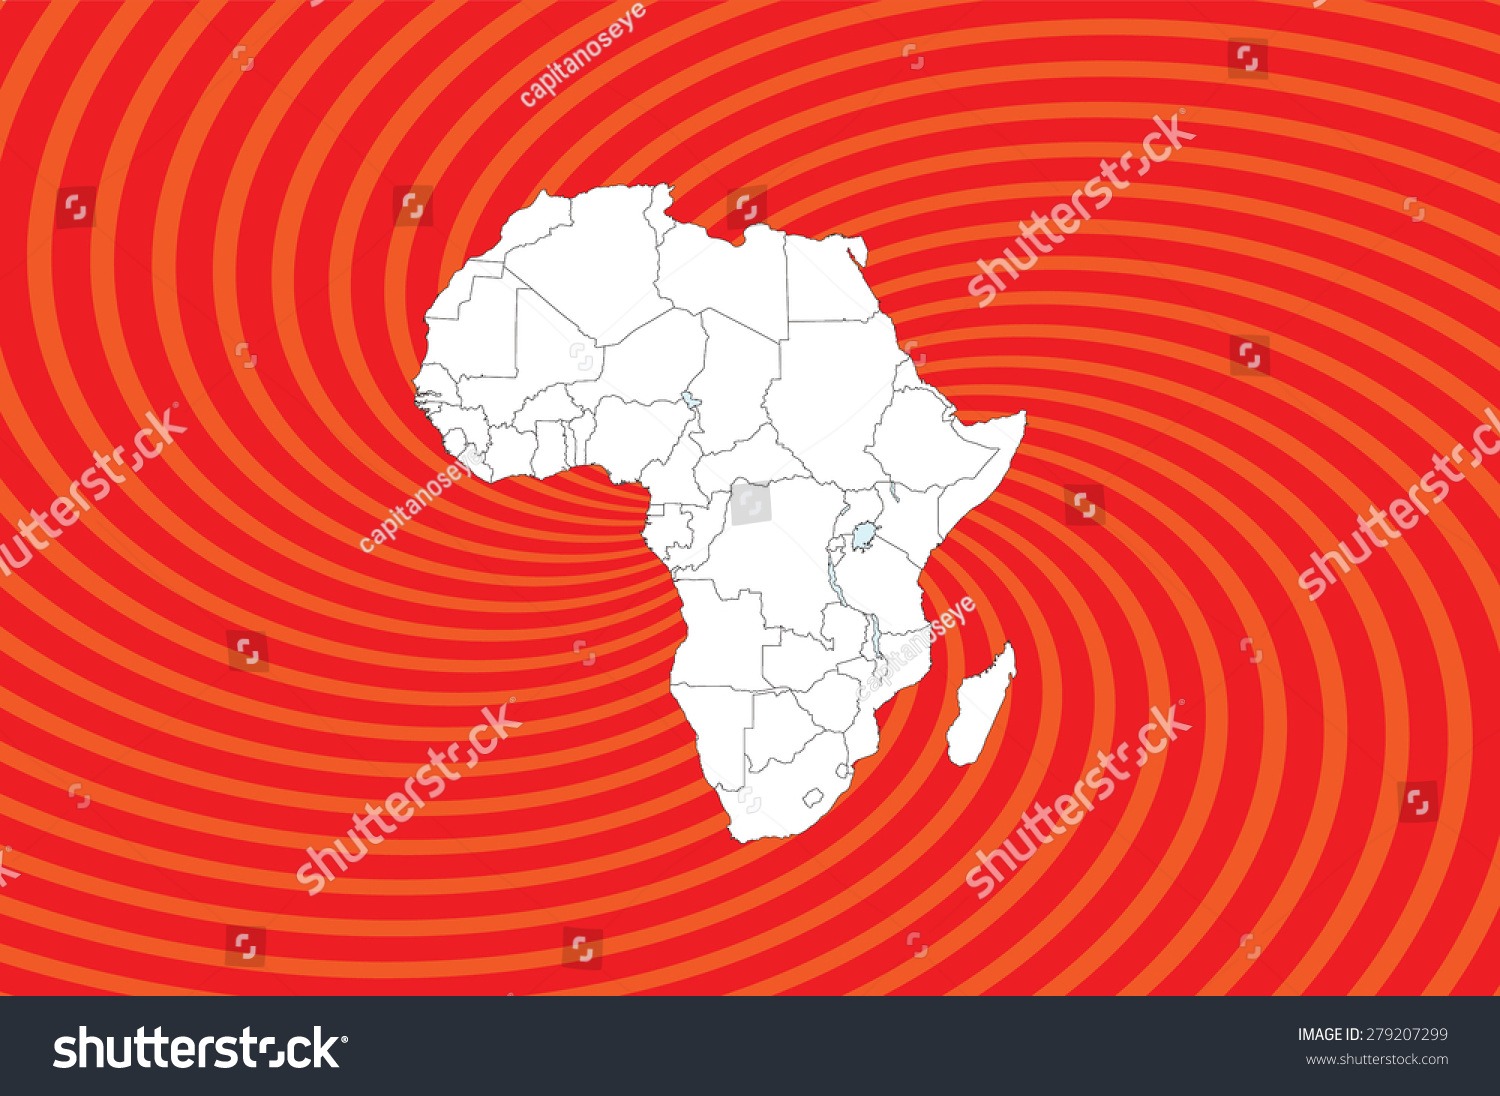 Detailed Map Africa Captivating Background Vectors Stock Vector Royalty Free 279207299 7365